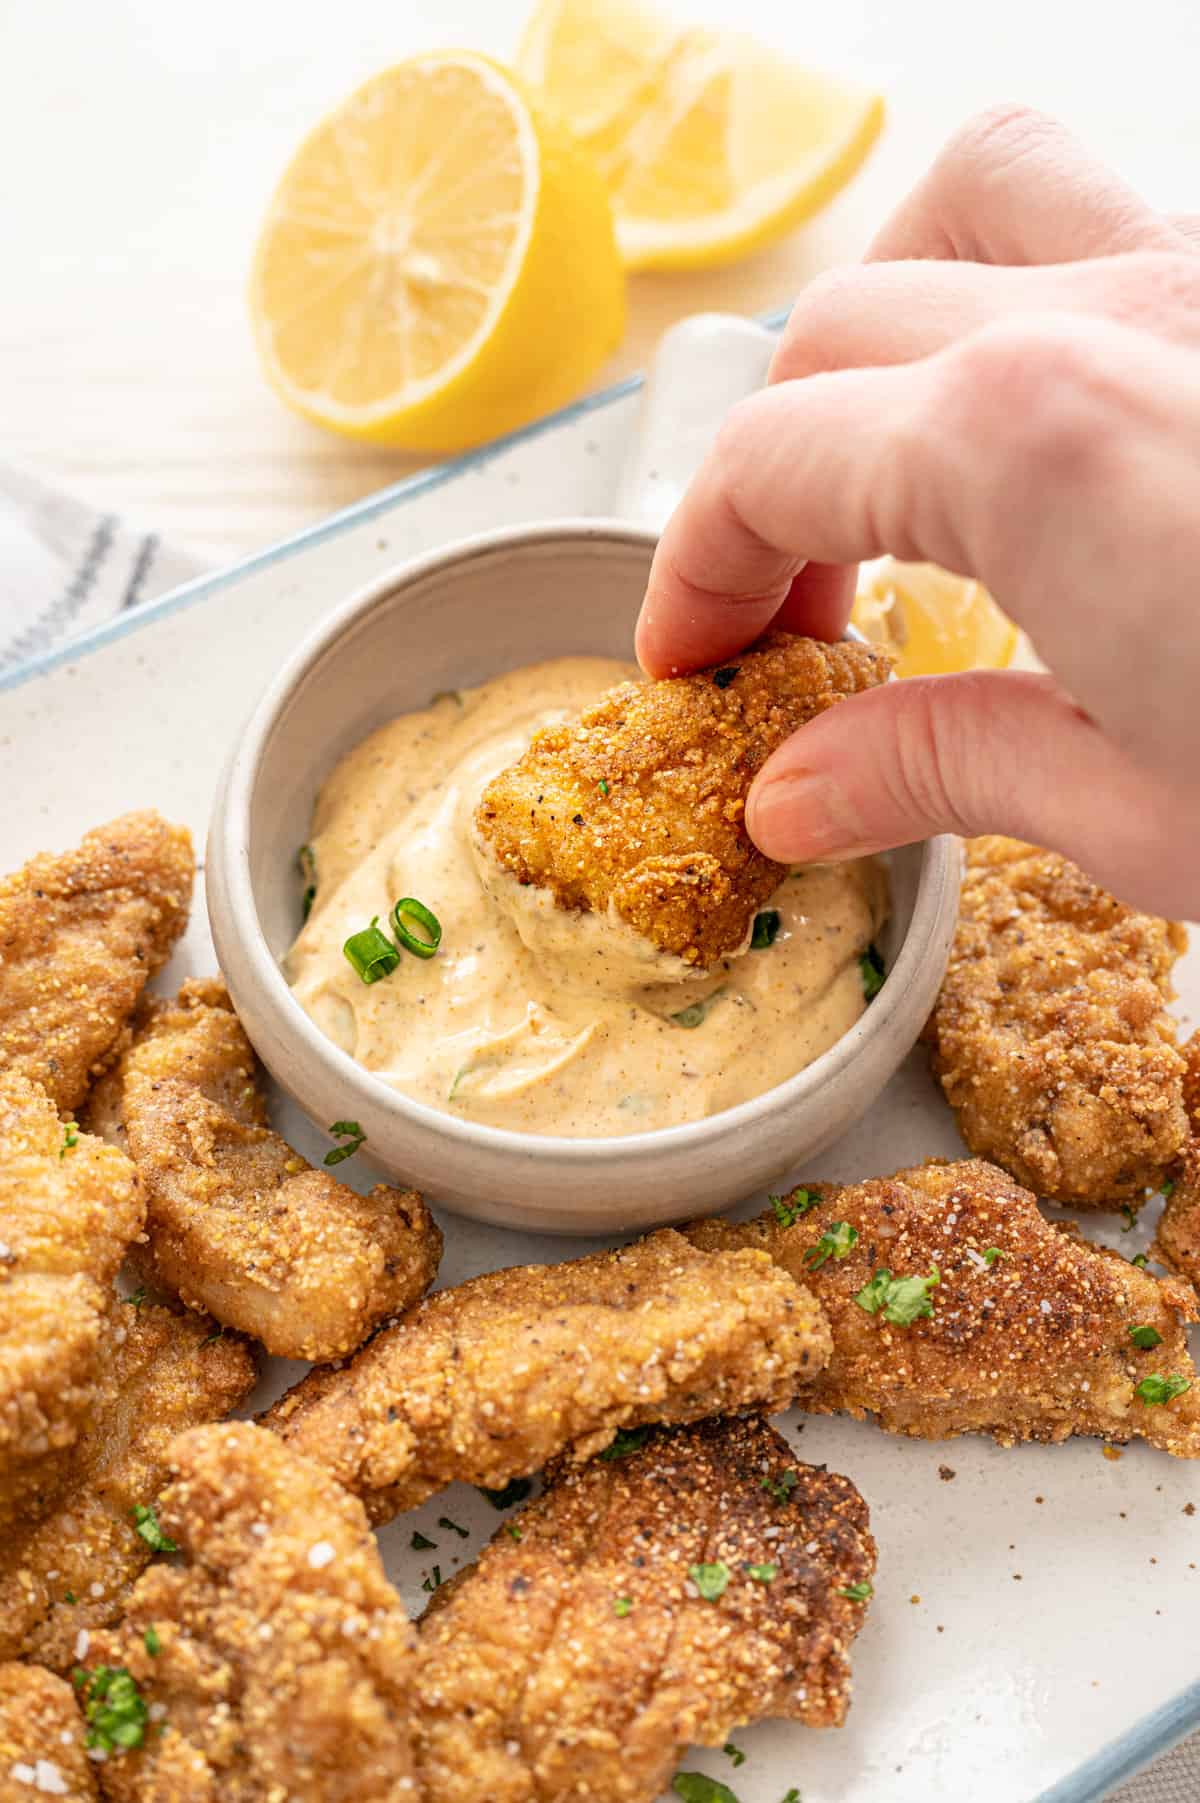 A catfish nugget being dipped in a bowl of Cajun remoulade sauce with other catfish nuggets on a plate.